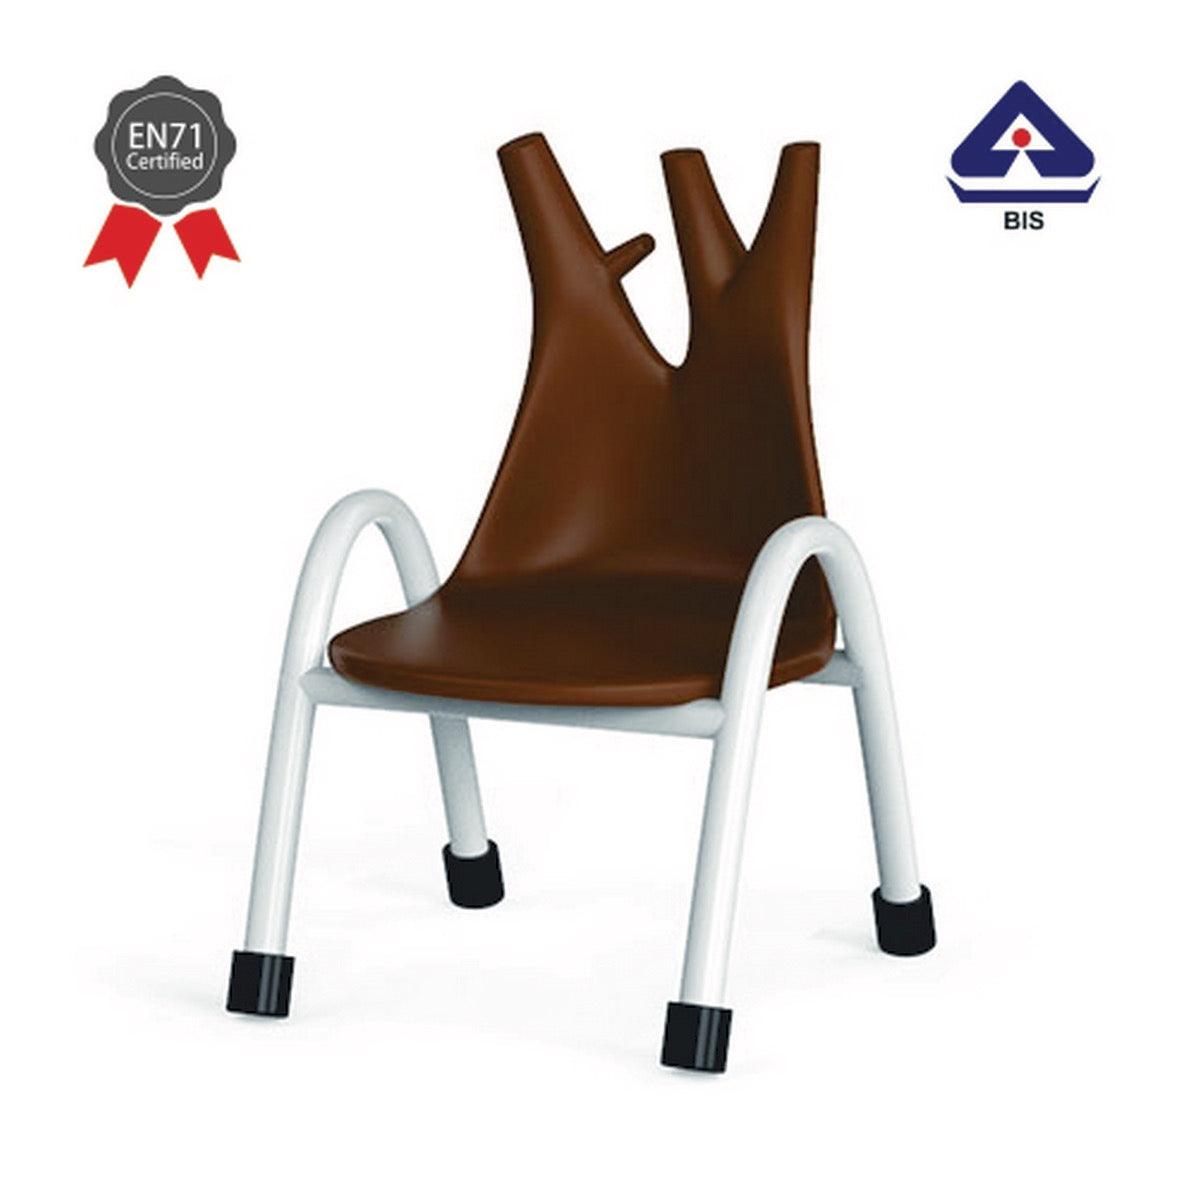 Ok Play Trunk Chair, Study Chair, Sturdy And Durable Chair, Plastic Chair, Perfect For Home, Creches And School, Brown, 5 to 10 Years, Height 14 Inches